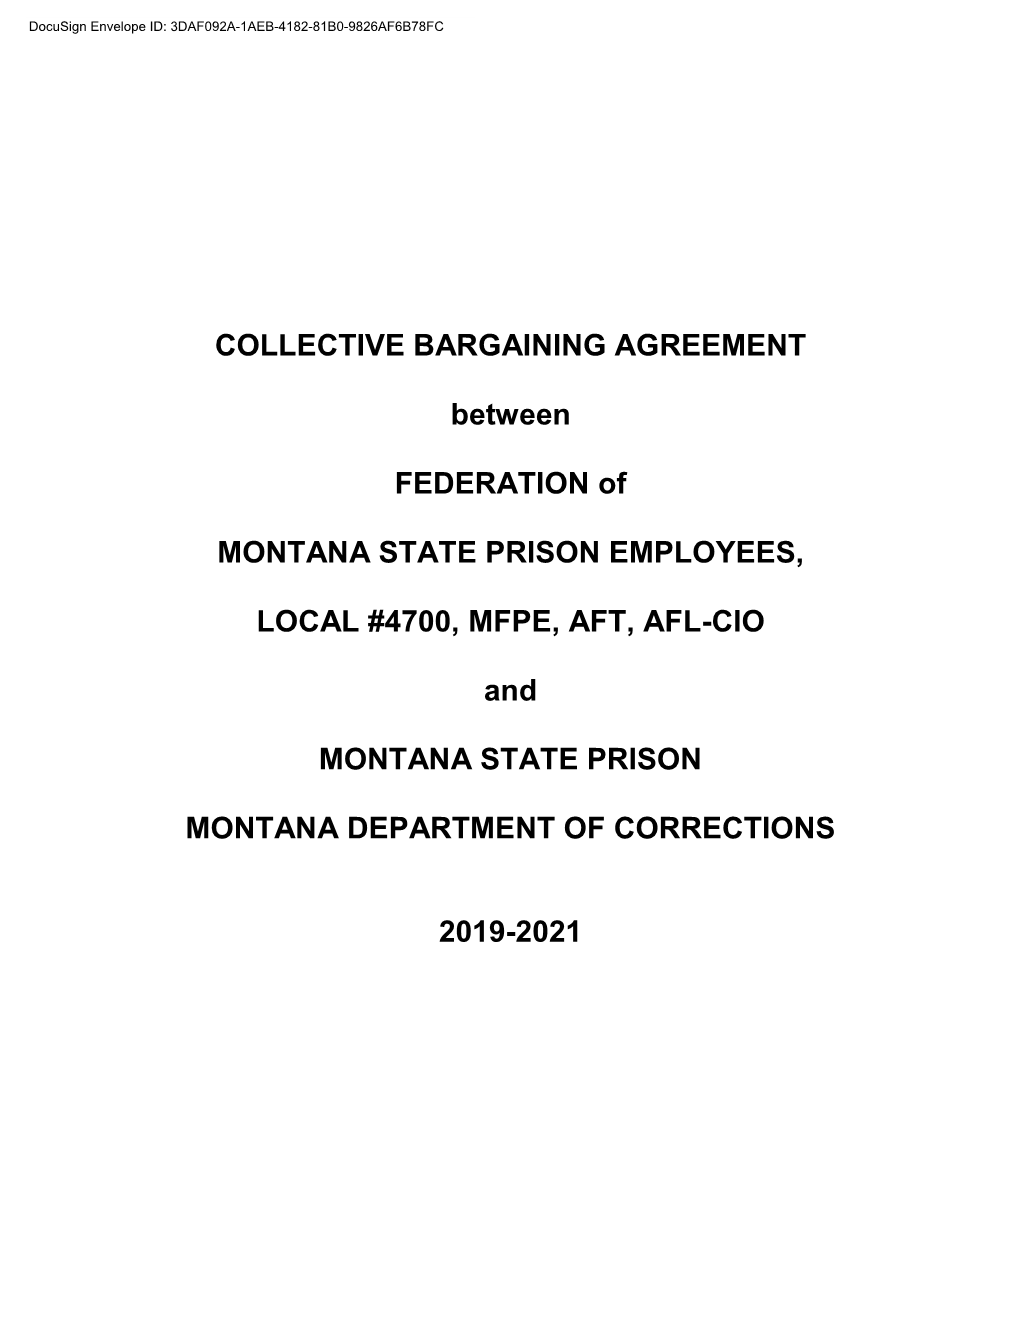 COLLECTIVE BARGAINING AGREEMENT Between FEDERATION of MONTANA STATE PRISON EMPLOYEES, LOCAL #4700, MFPE, AFT, AFL-CIO and MONTAN